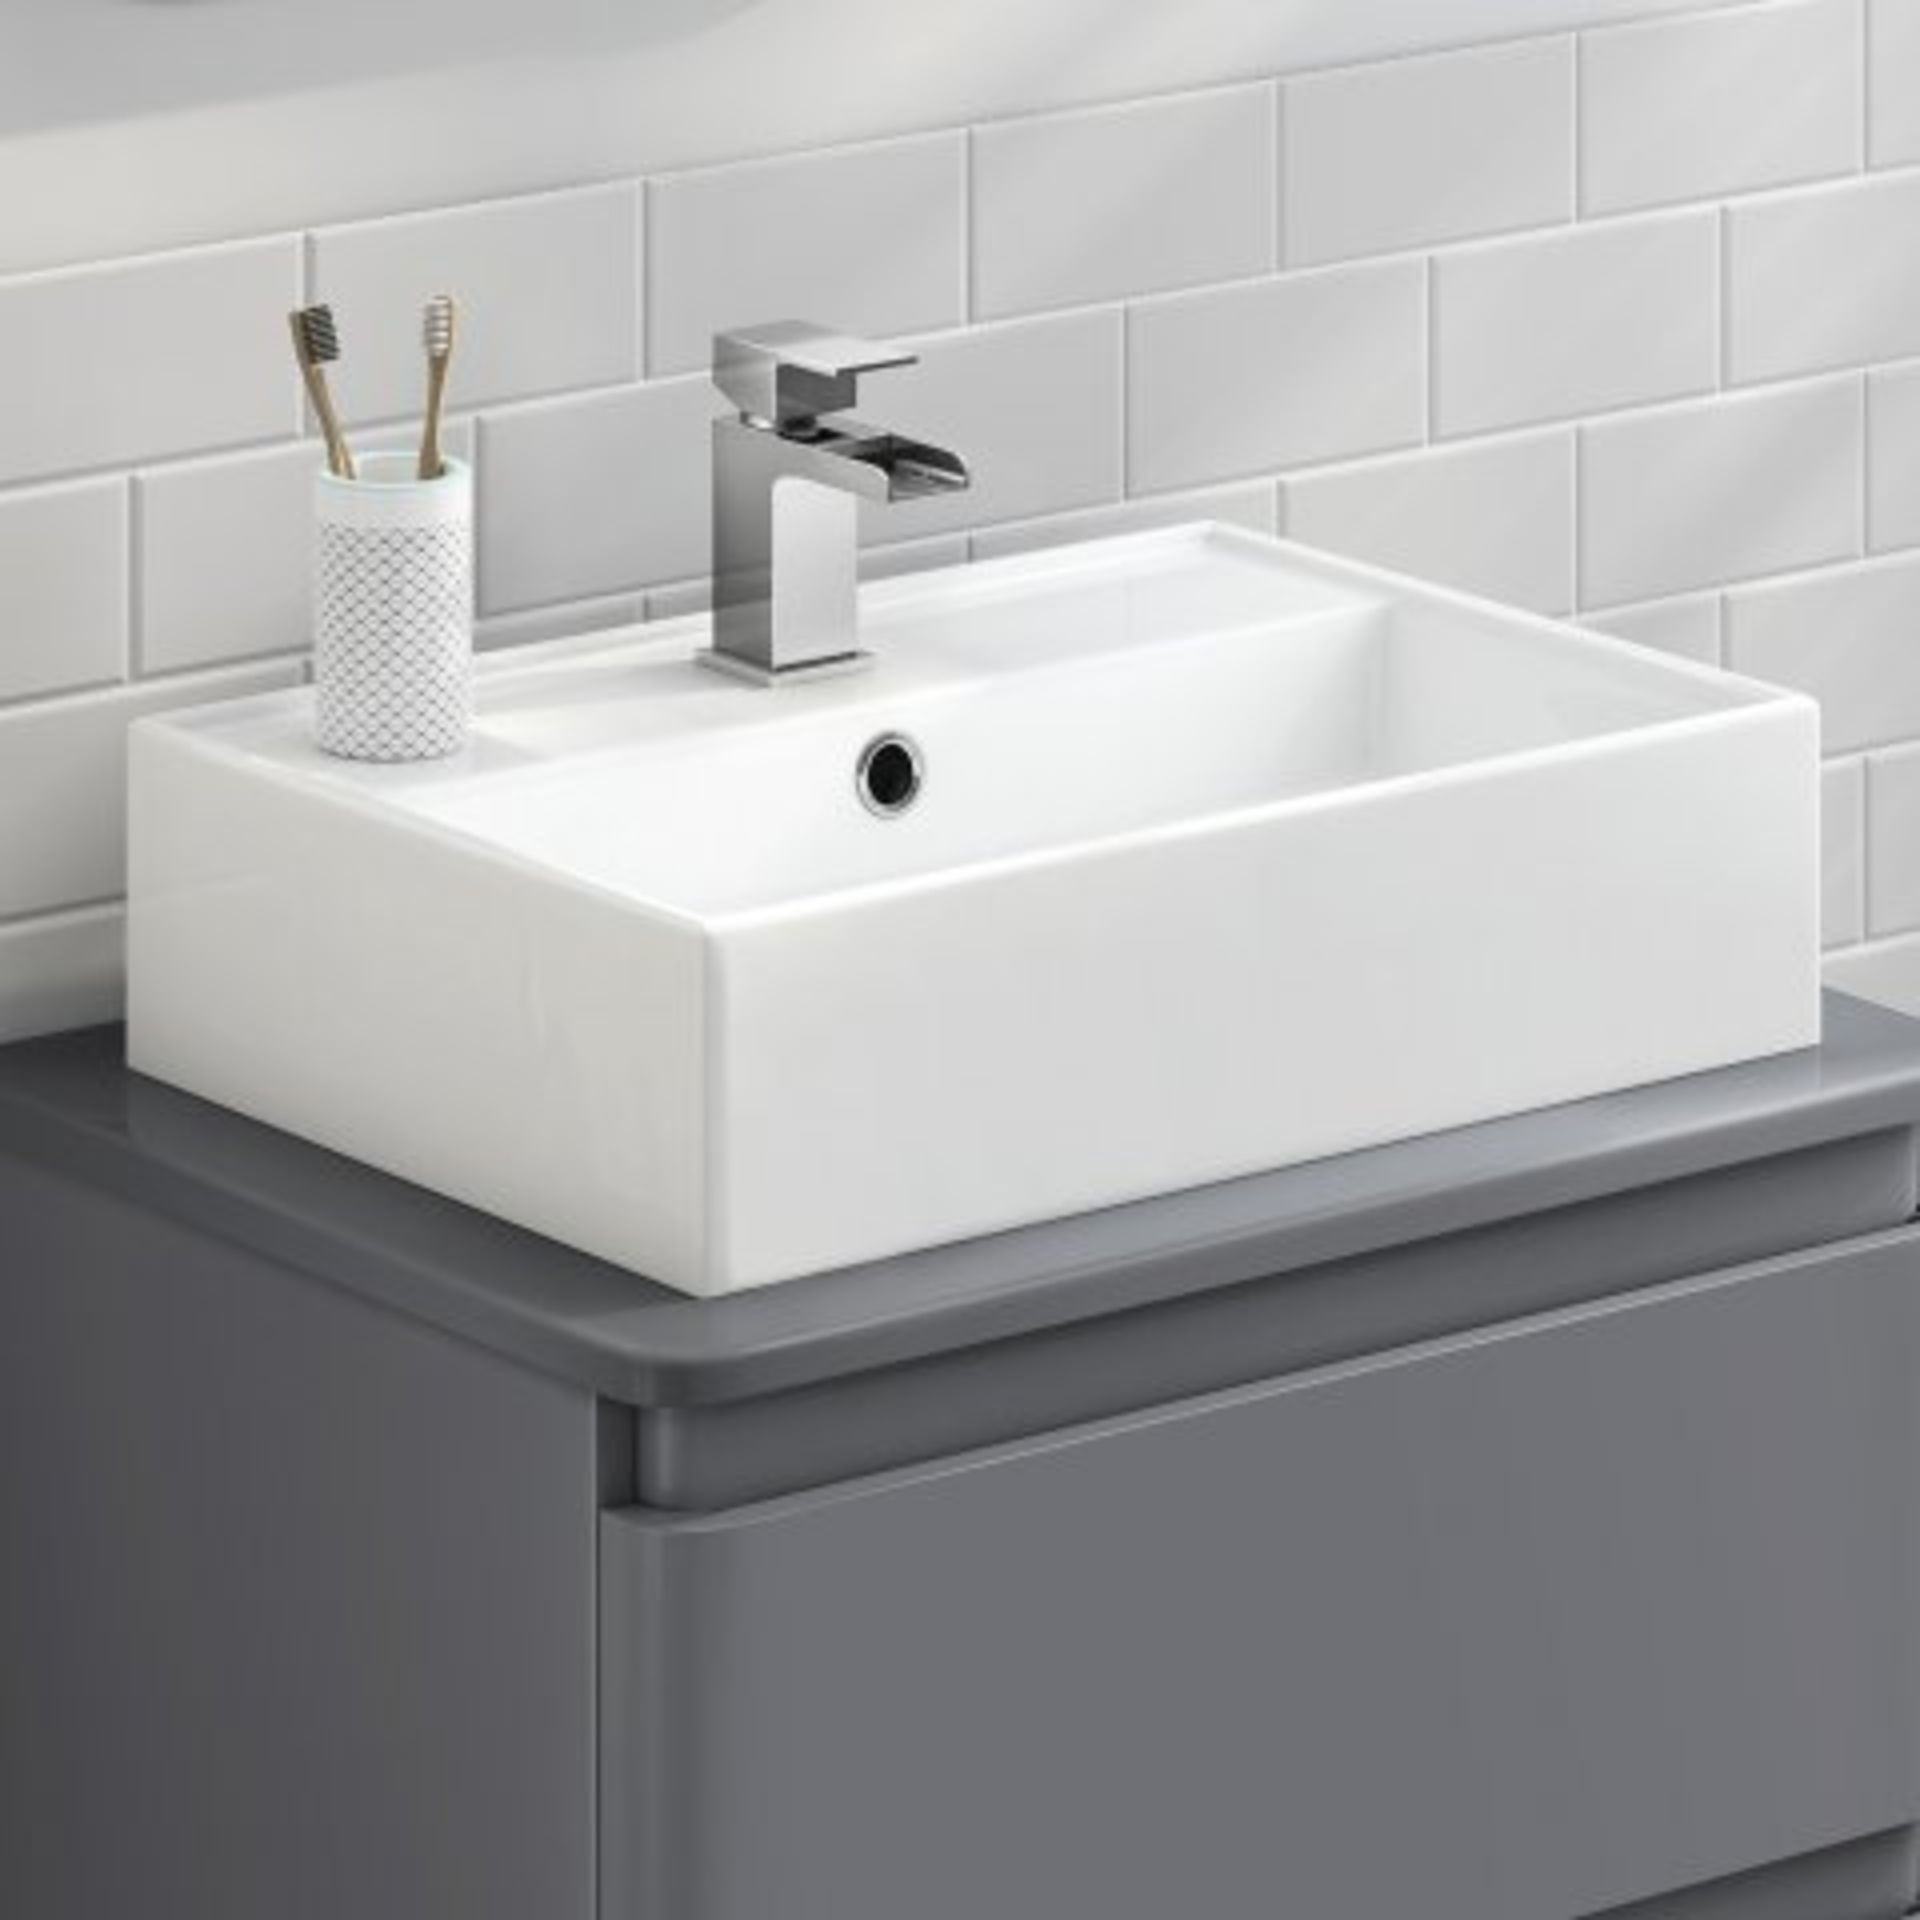 (O47) Elisa Wall Hung Counter Top Basin. RRP £99.99. Classy and practical, our contemporary